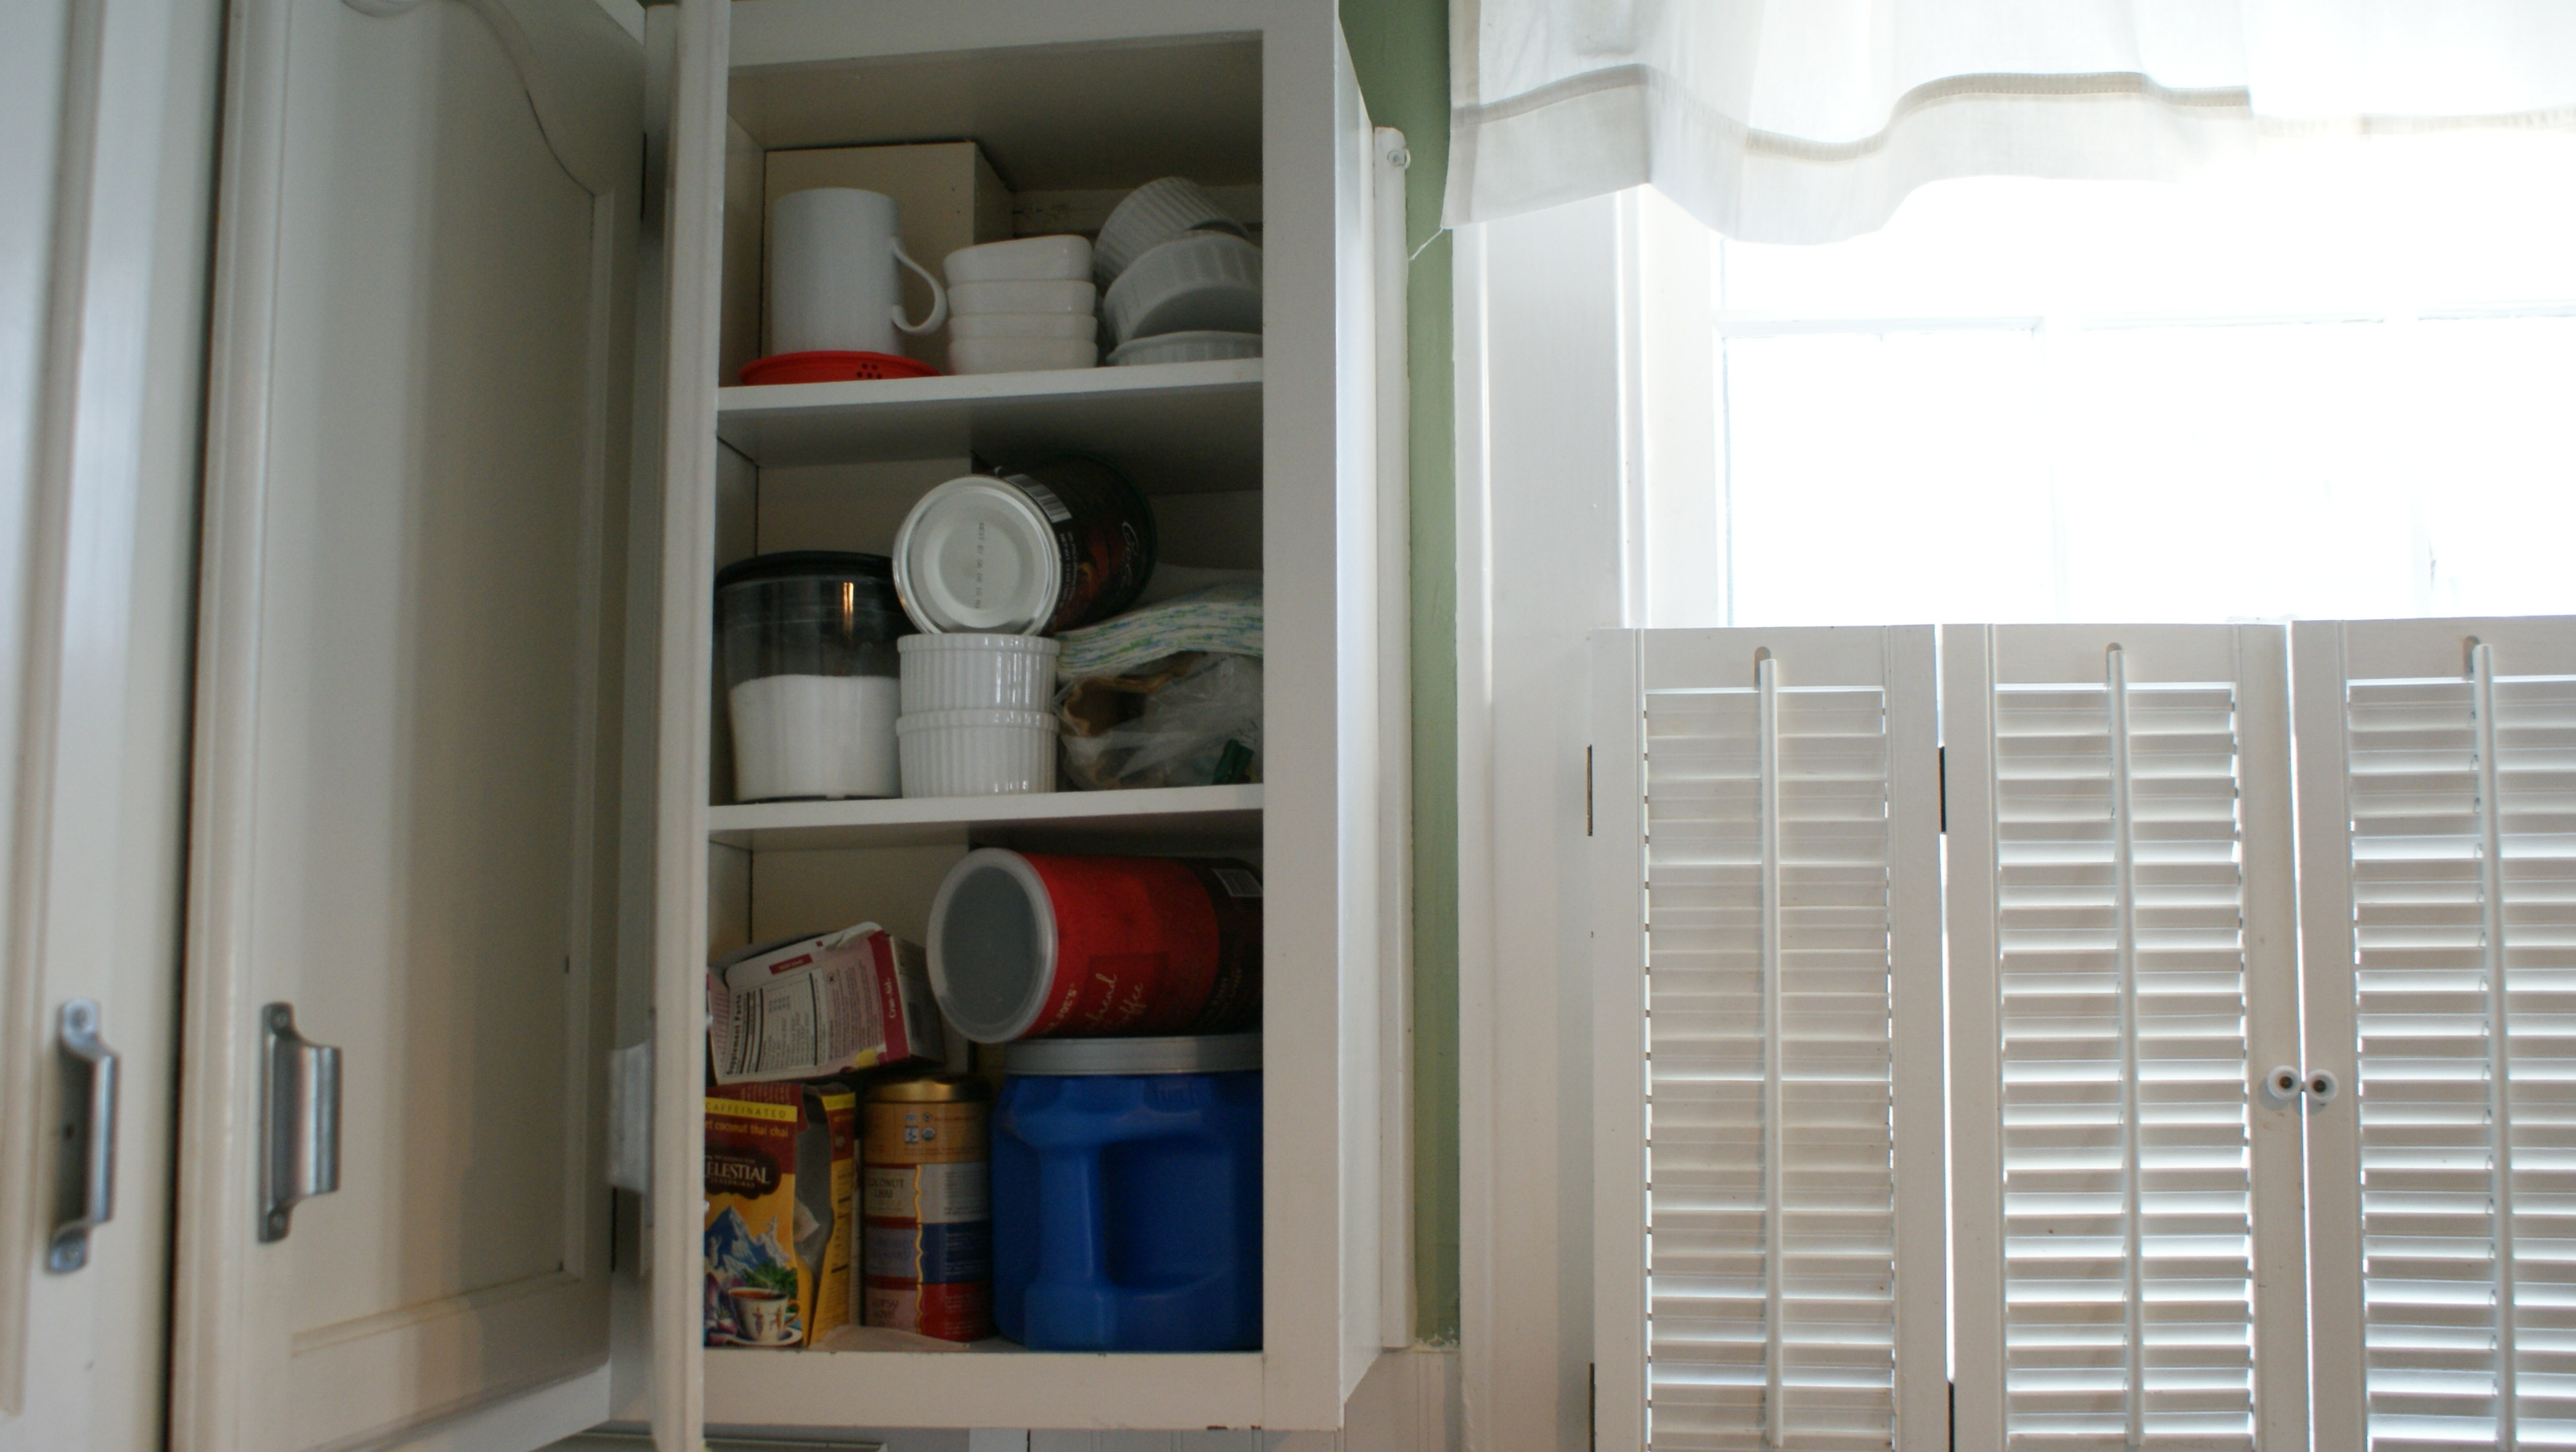 Nesting…the kitchen cupboards